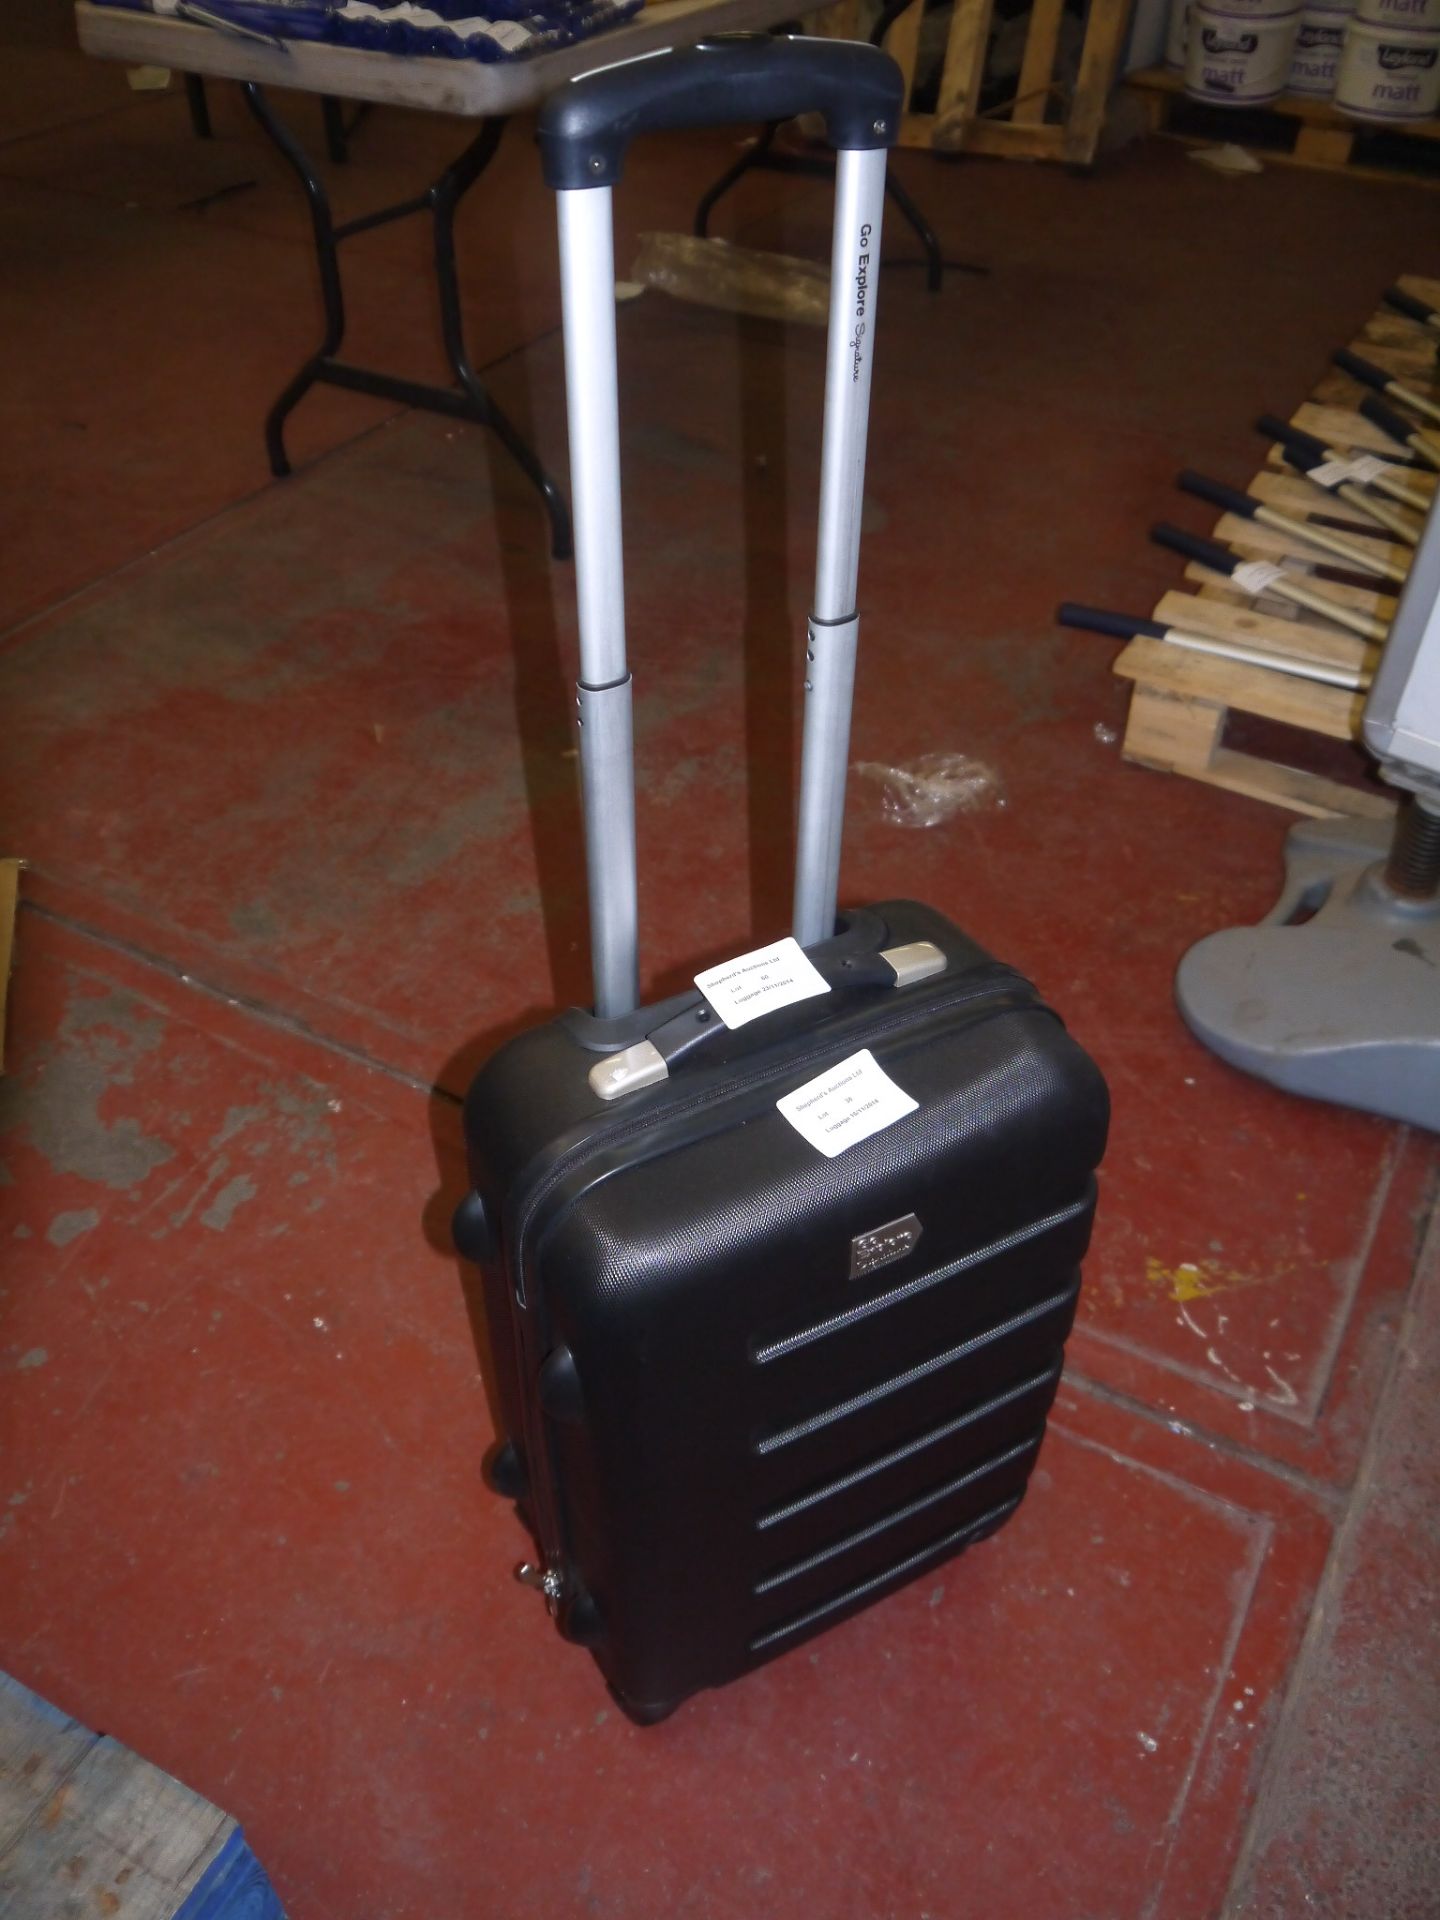 GO Explore signature Small 4 wheel spinner roller suitcase, looks in very good condition